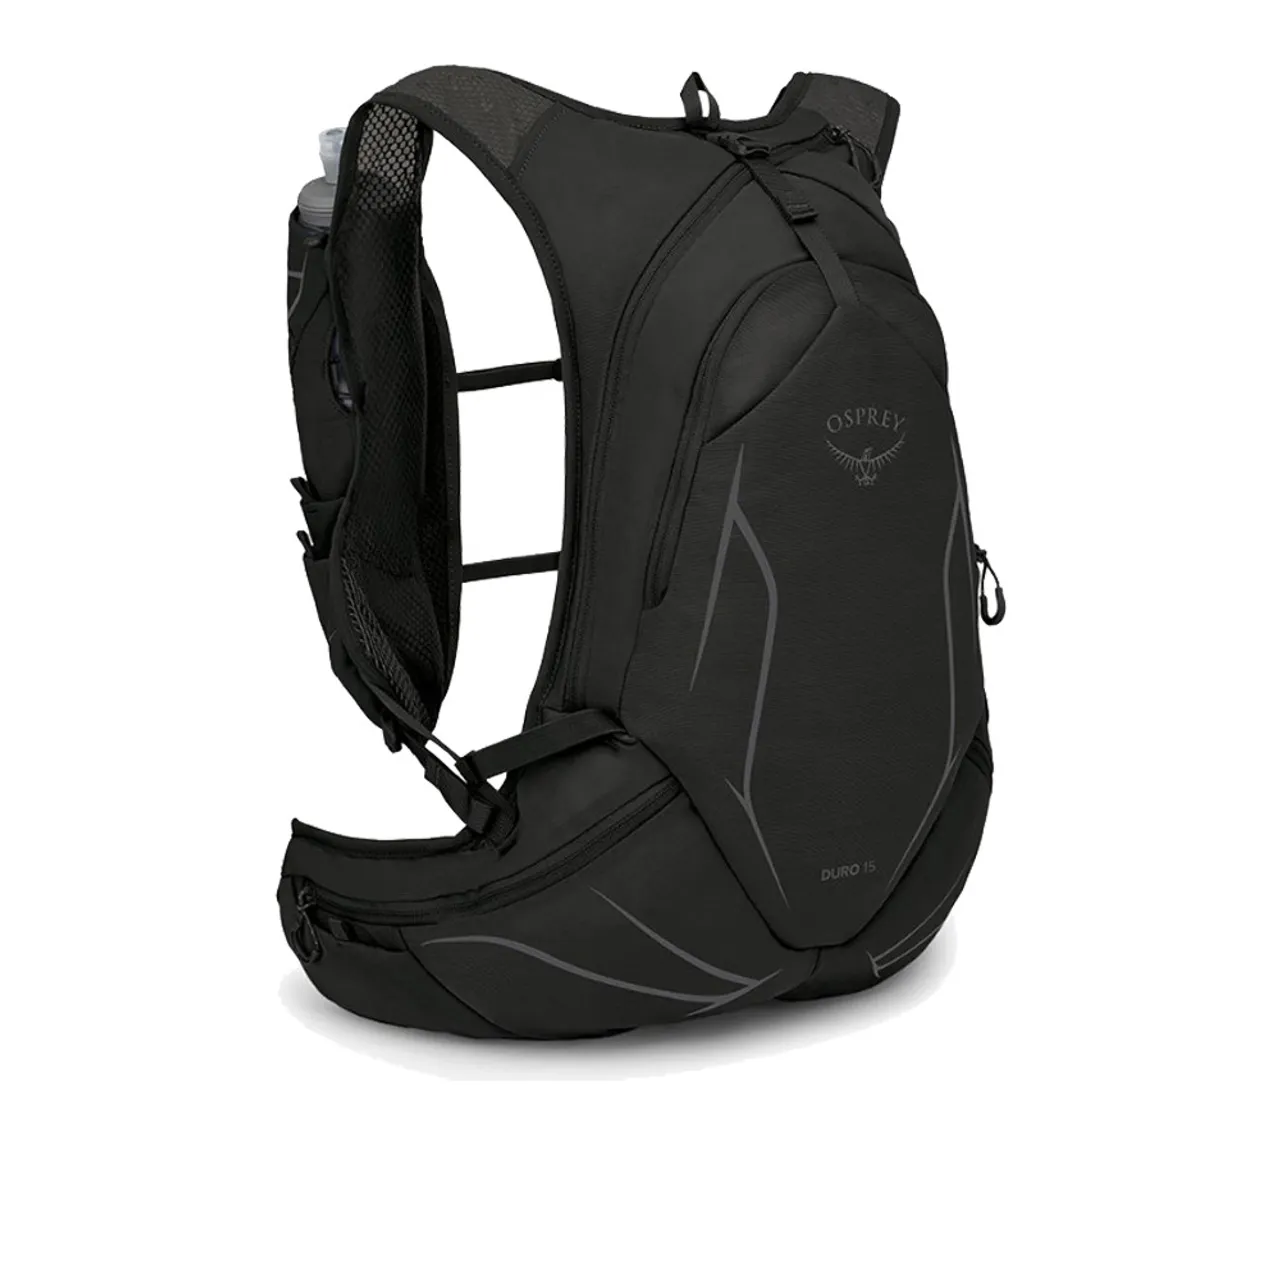 Osprey Duro 15 Backpack with Flasks (S/M) - AW23